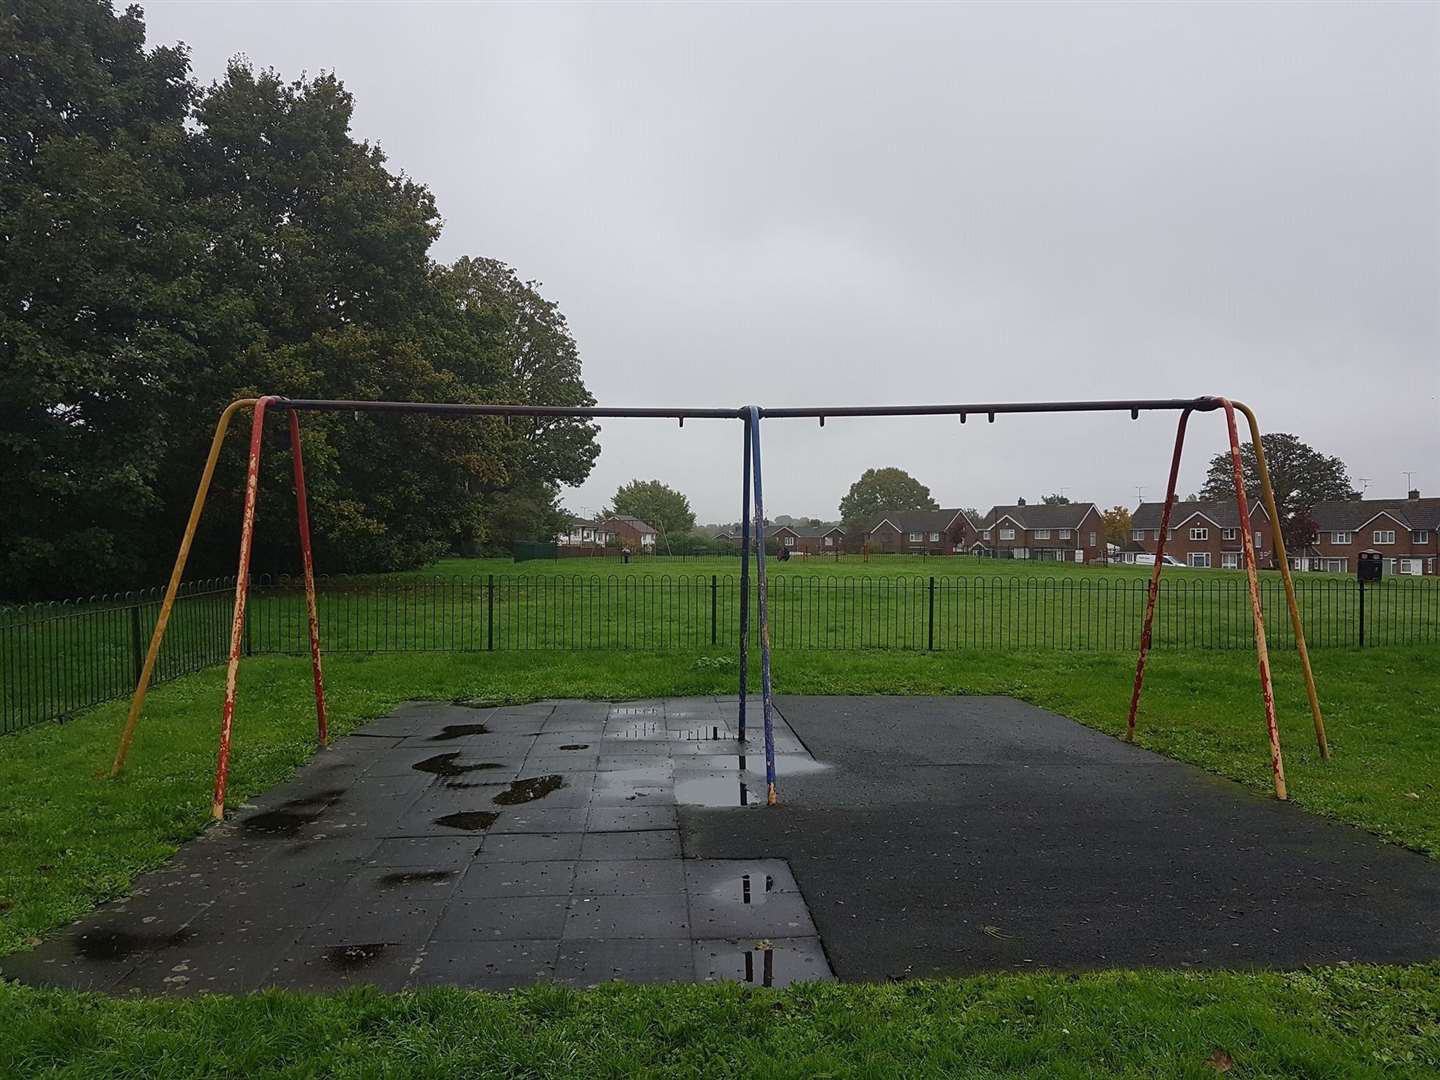 Play equipment has been removed due to safety concerns